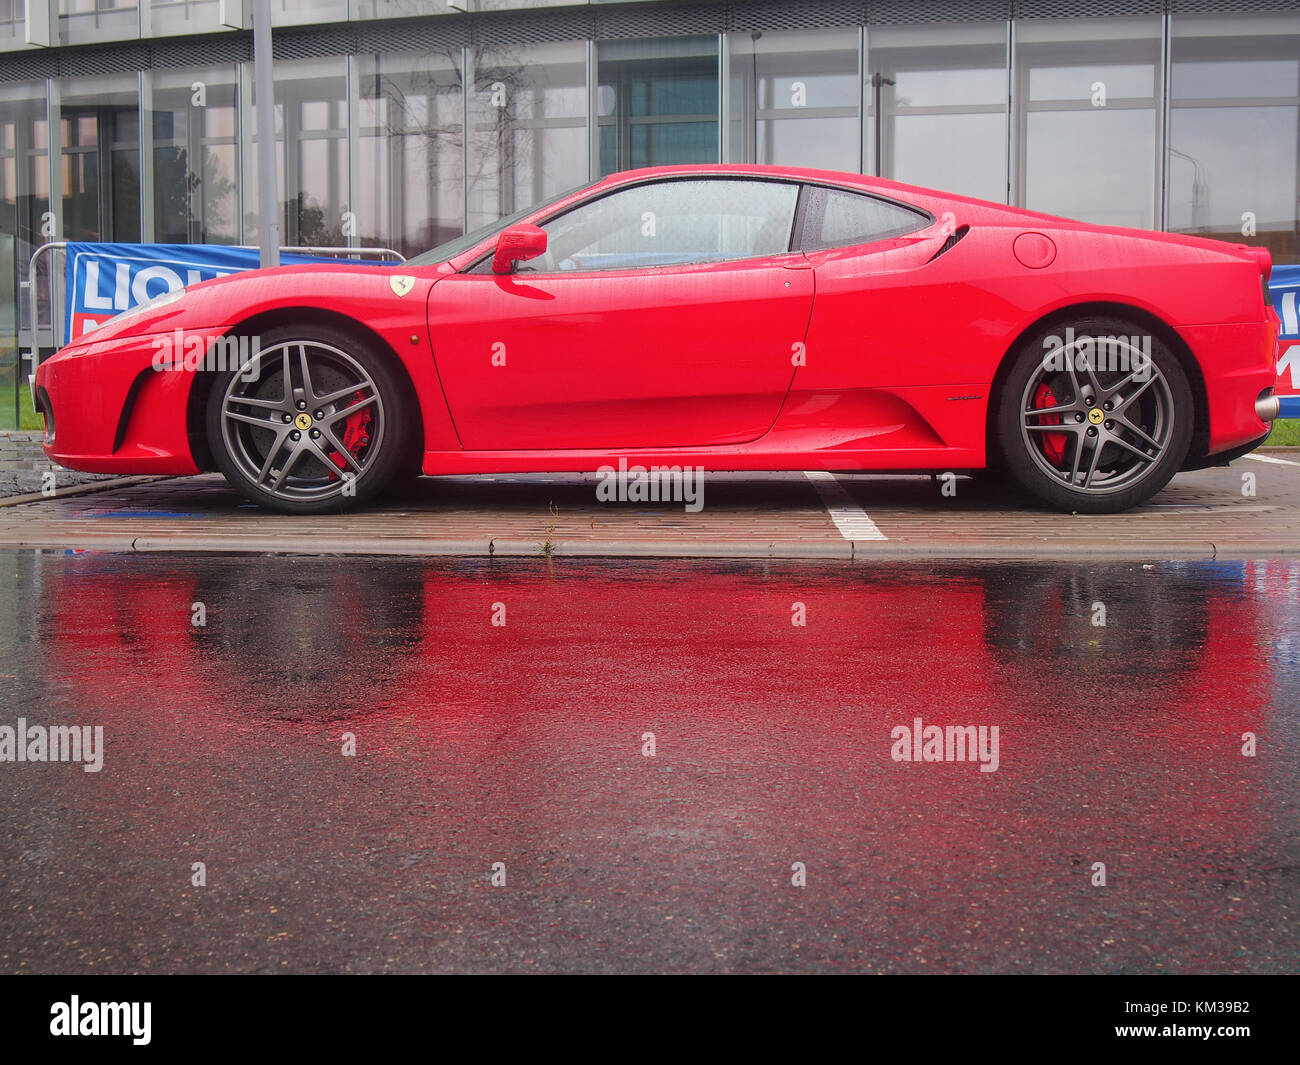 VILNIUS, LITHUANIA-AUGUST 20, 2017: Red Ferrari F430 in the rain. This model is one of the most popular cars for Ferrari fans. Stock Photo